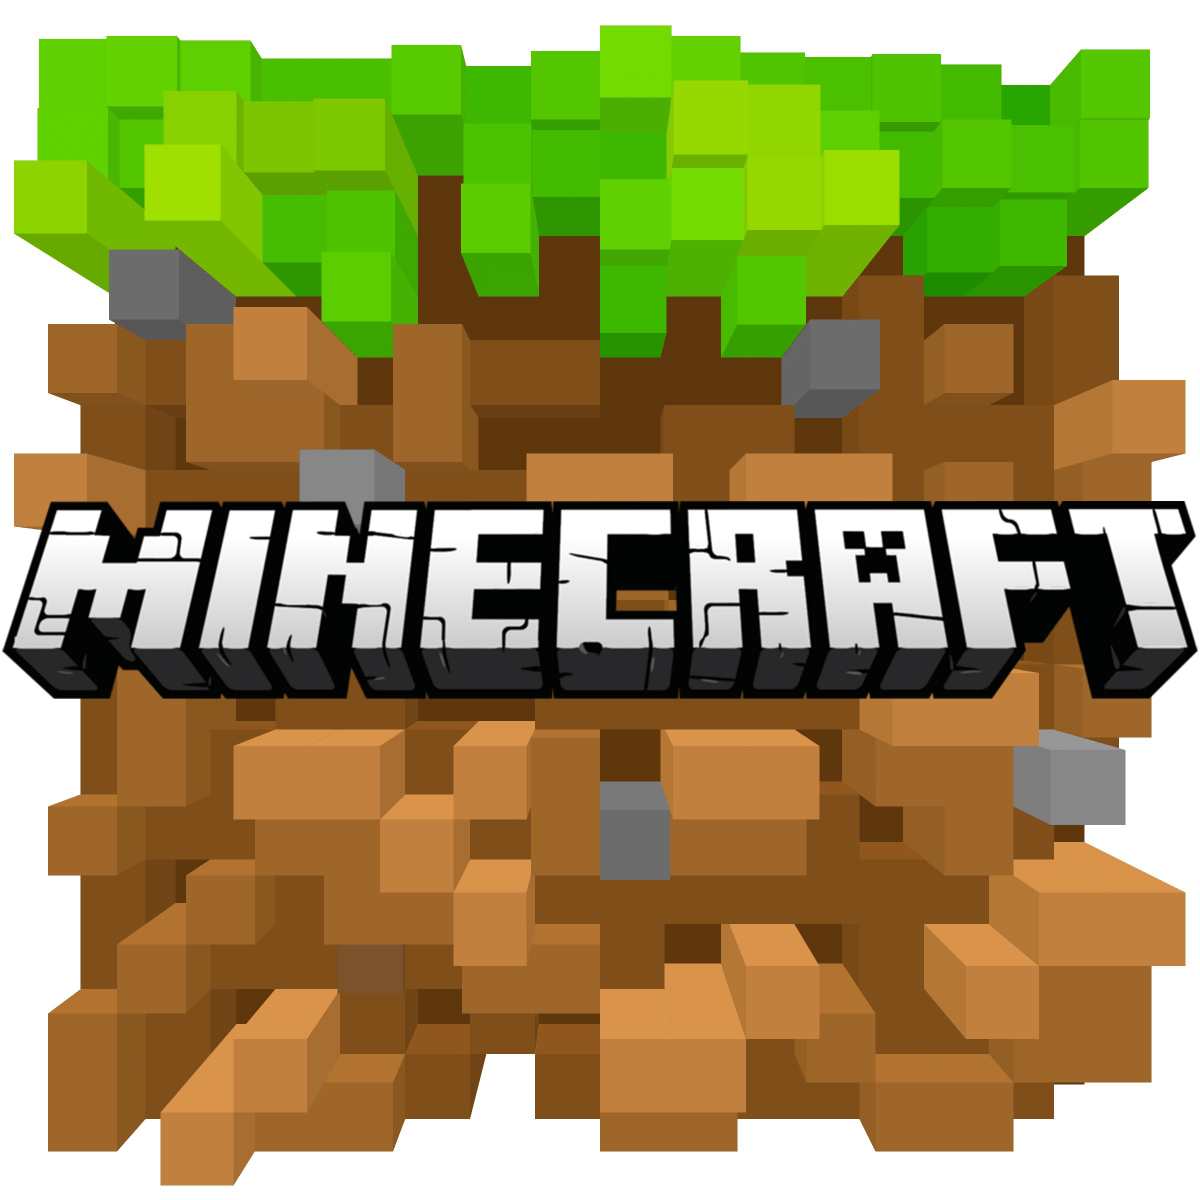 minecraft free download pc full game